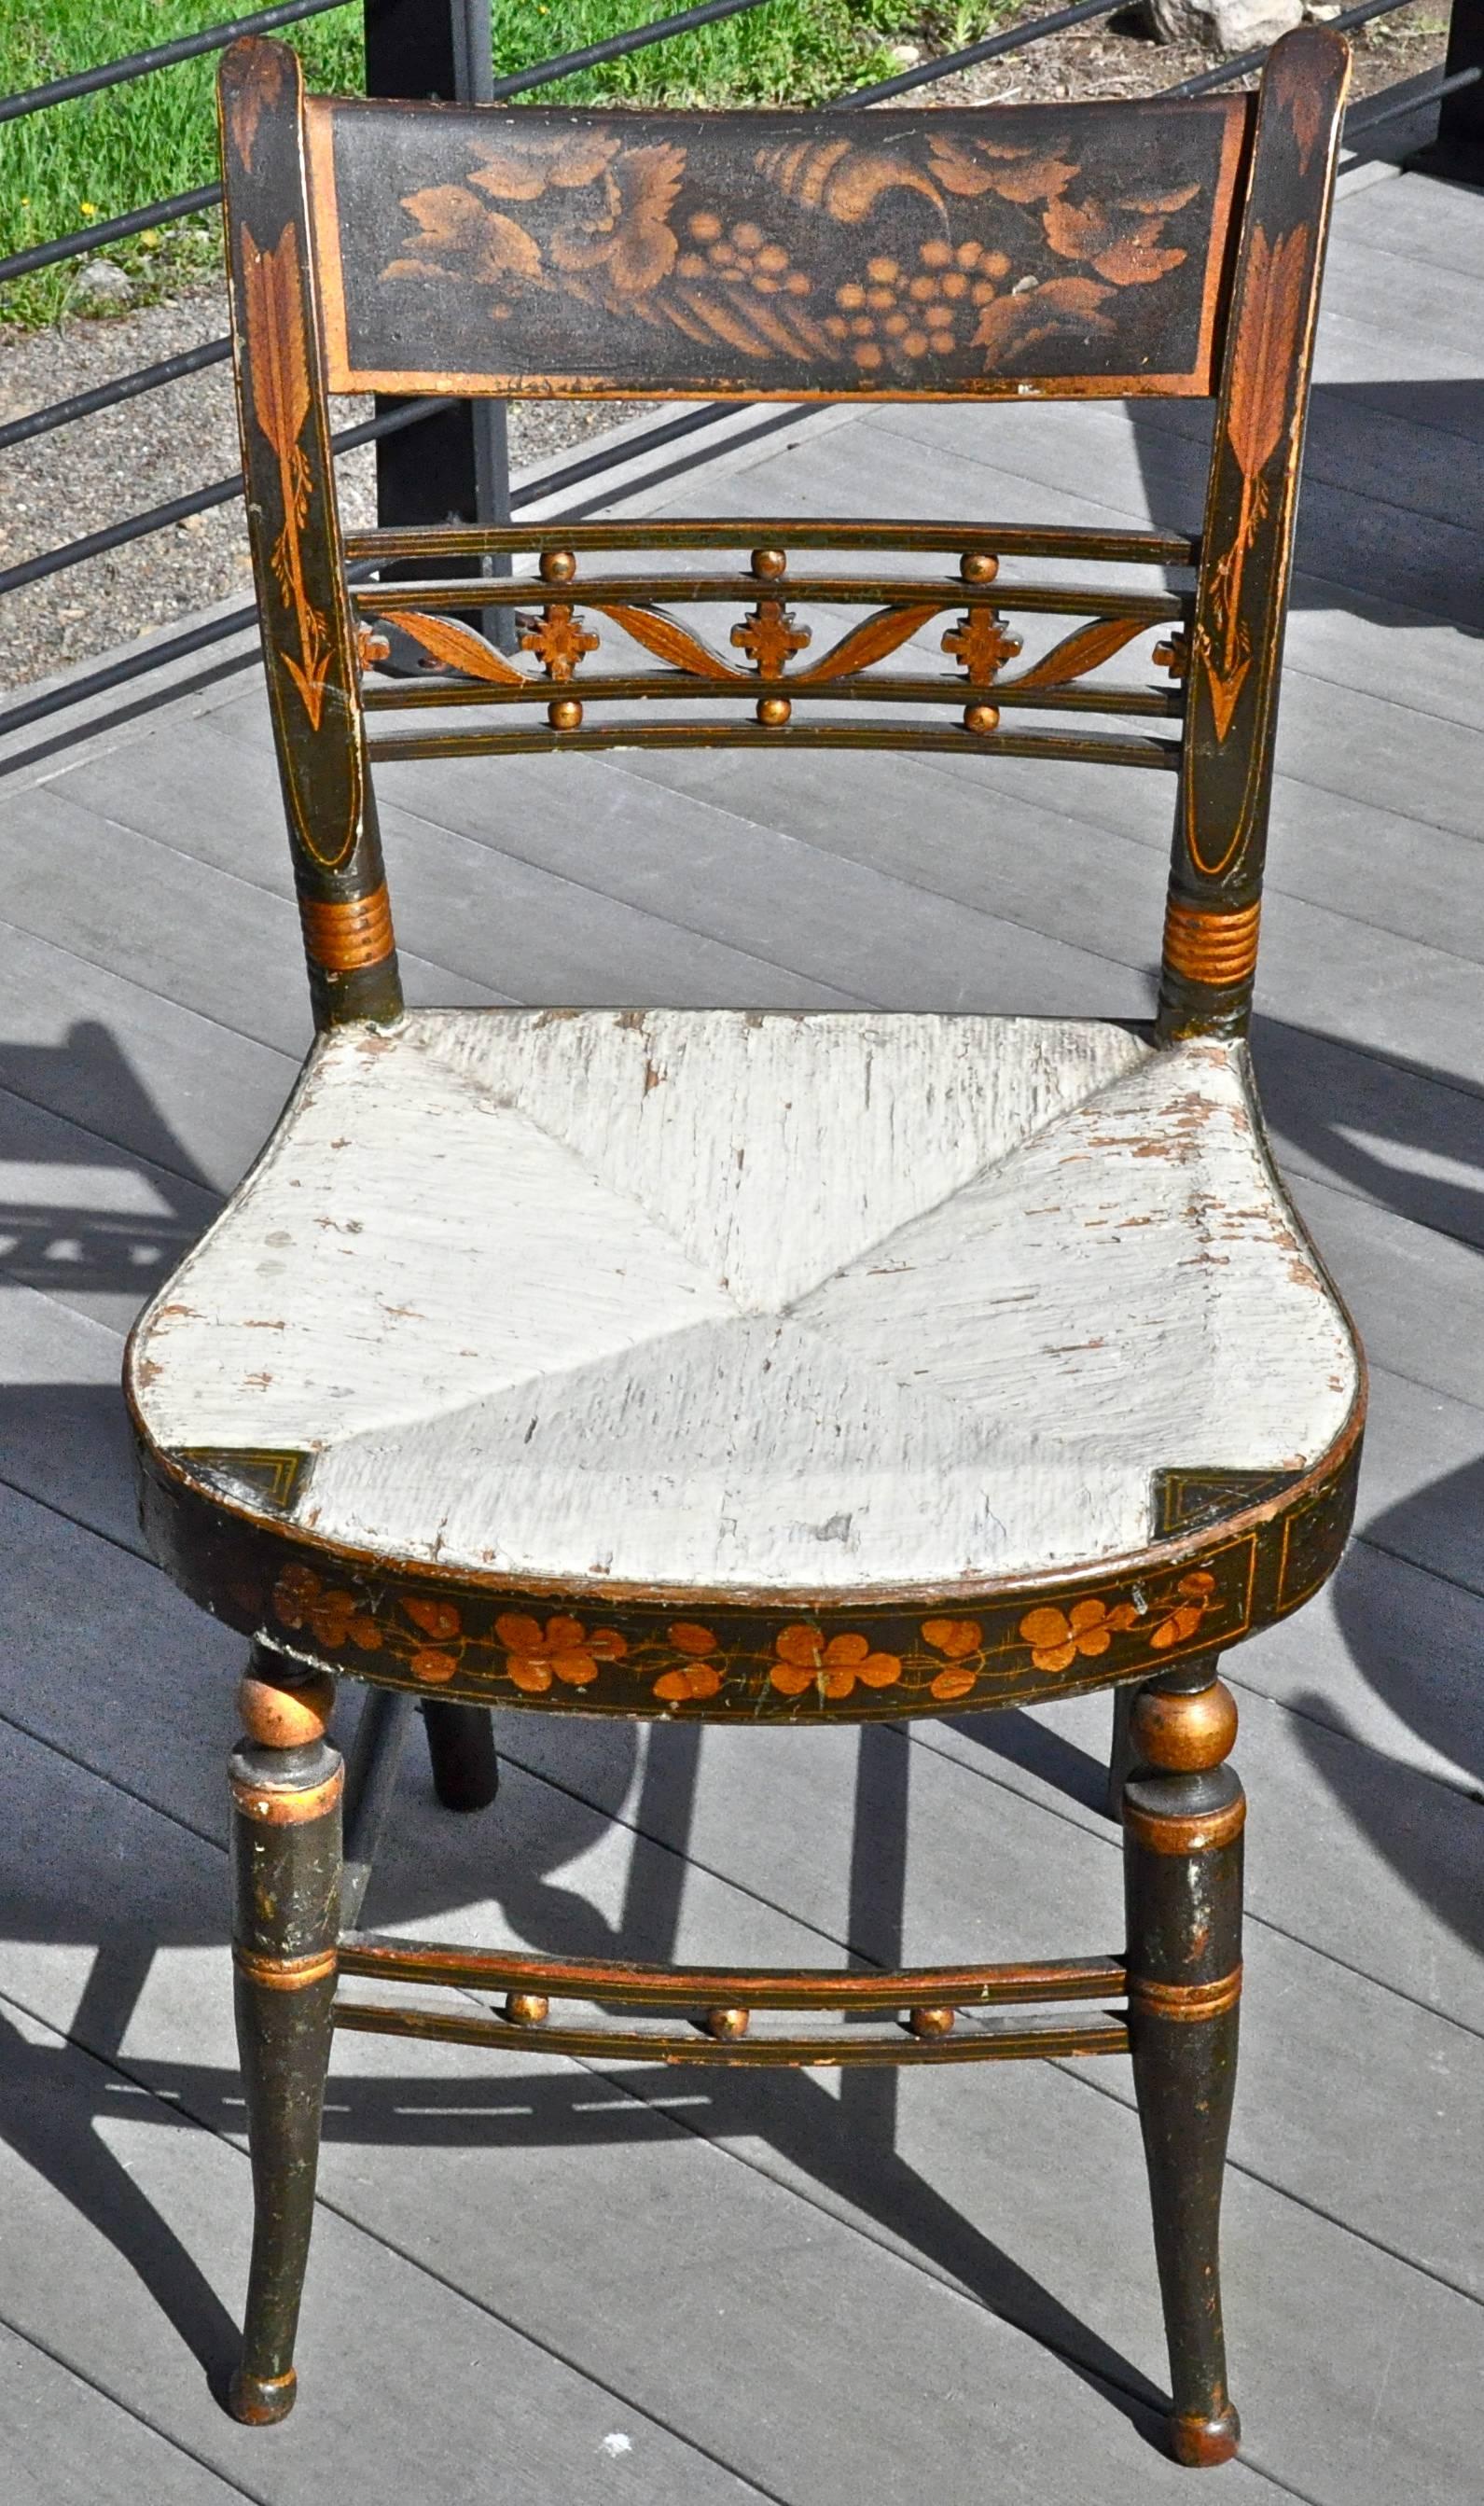 Set of 12 new England fancy painted sheraton dining chairs, Maple, early 19th century.

Original green paint, stenciling and color, original varnish.
Shell and leaf gilt stencil on back, neoclassical arrows on back rails, oak leaves and acorn